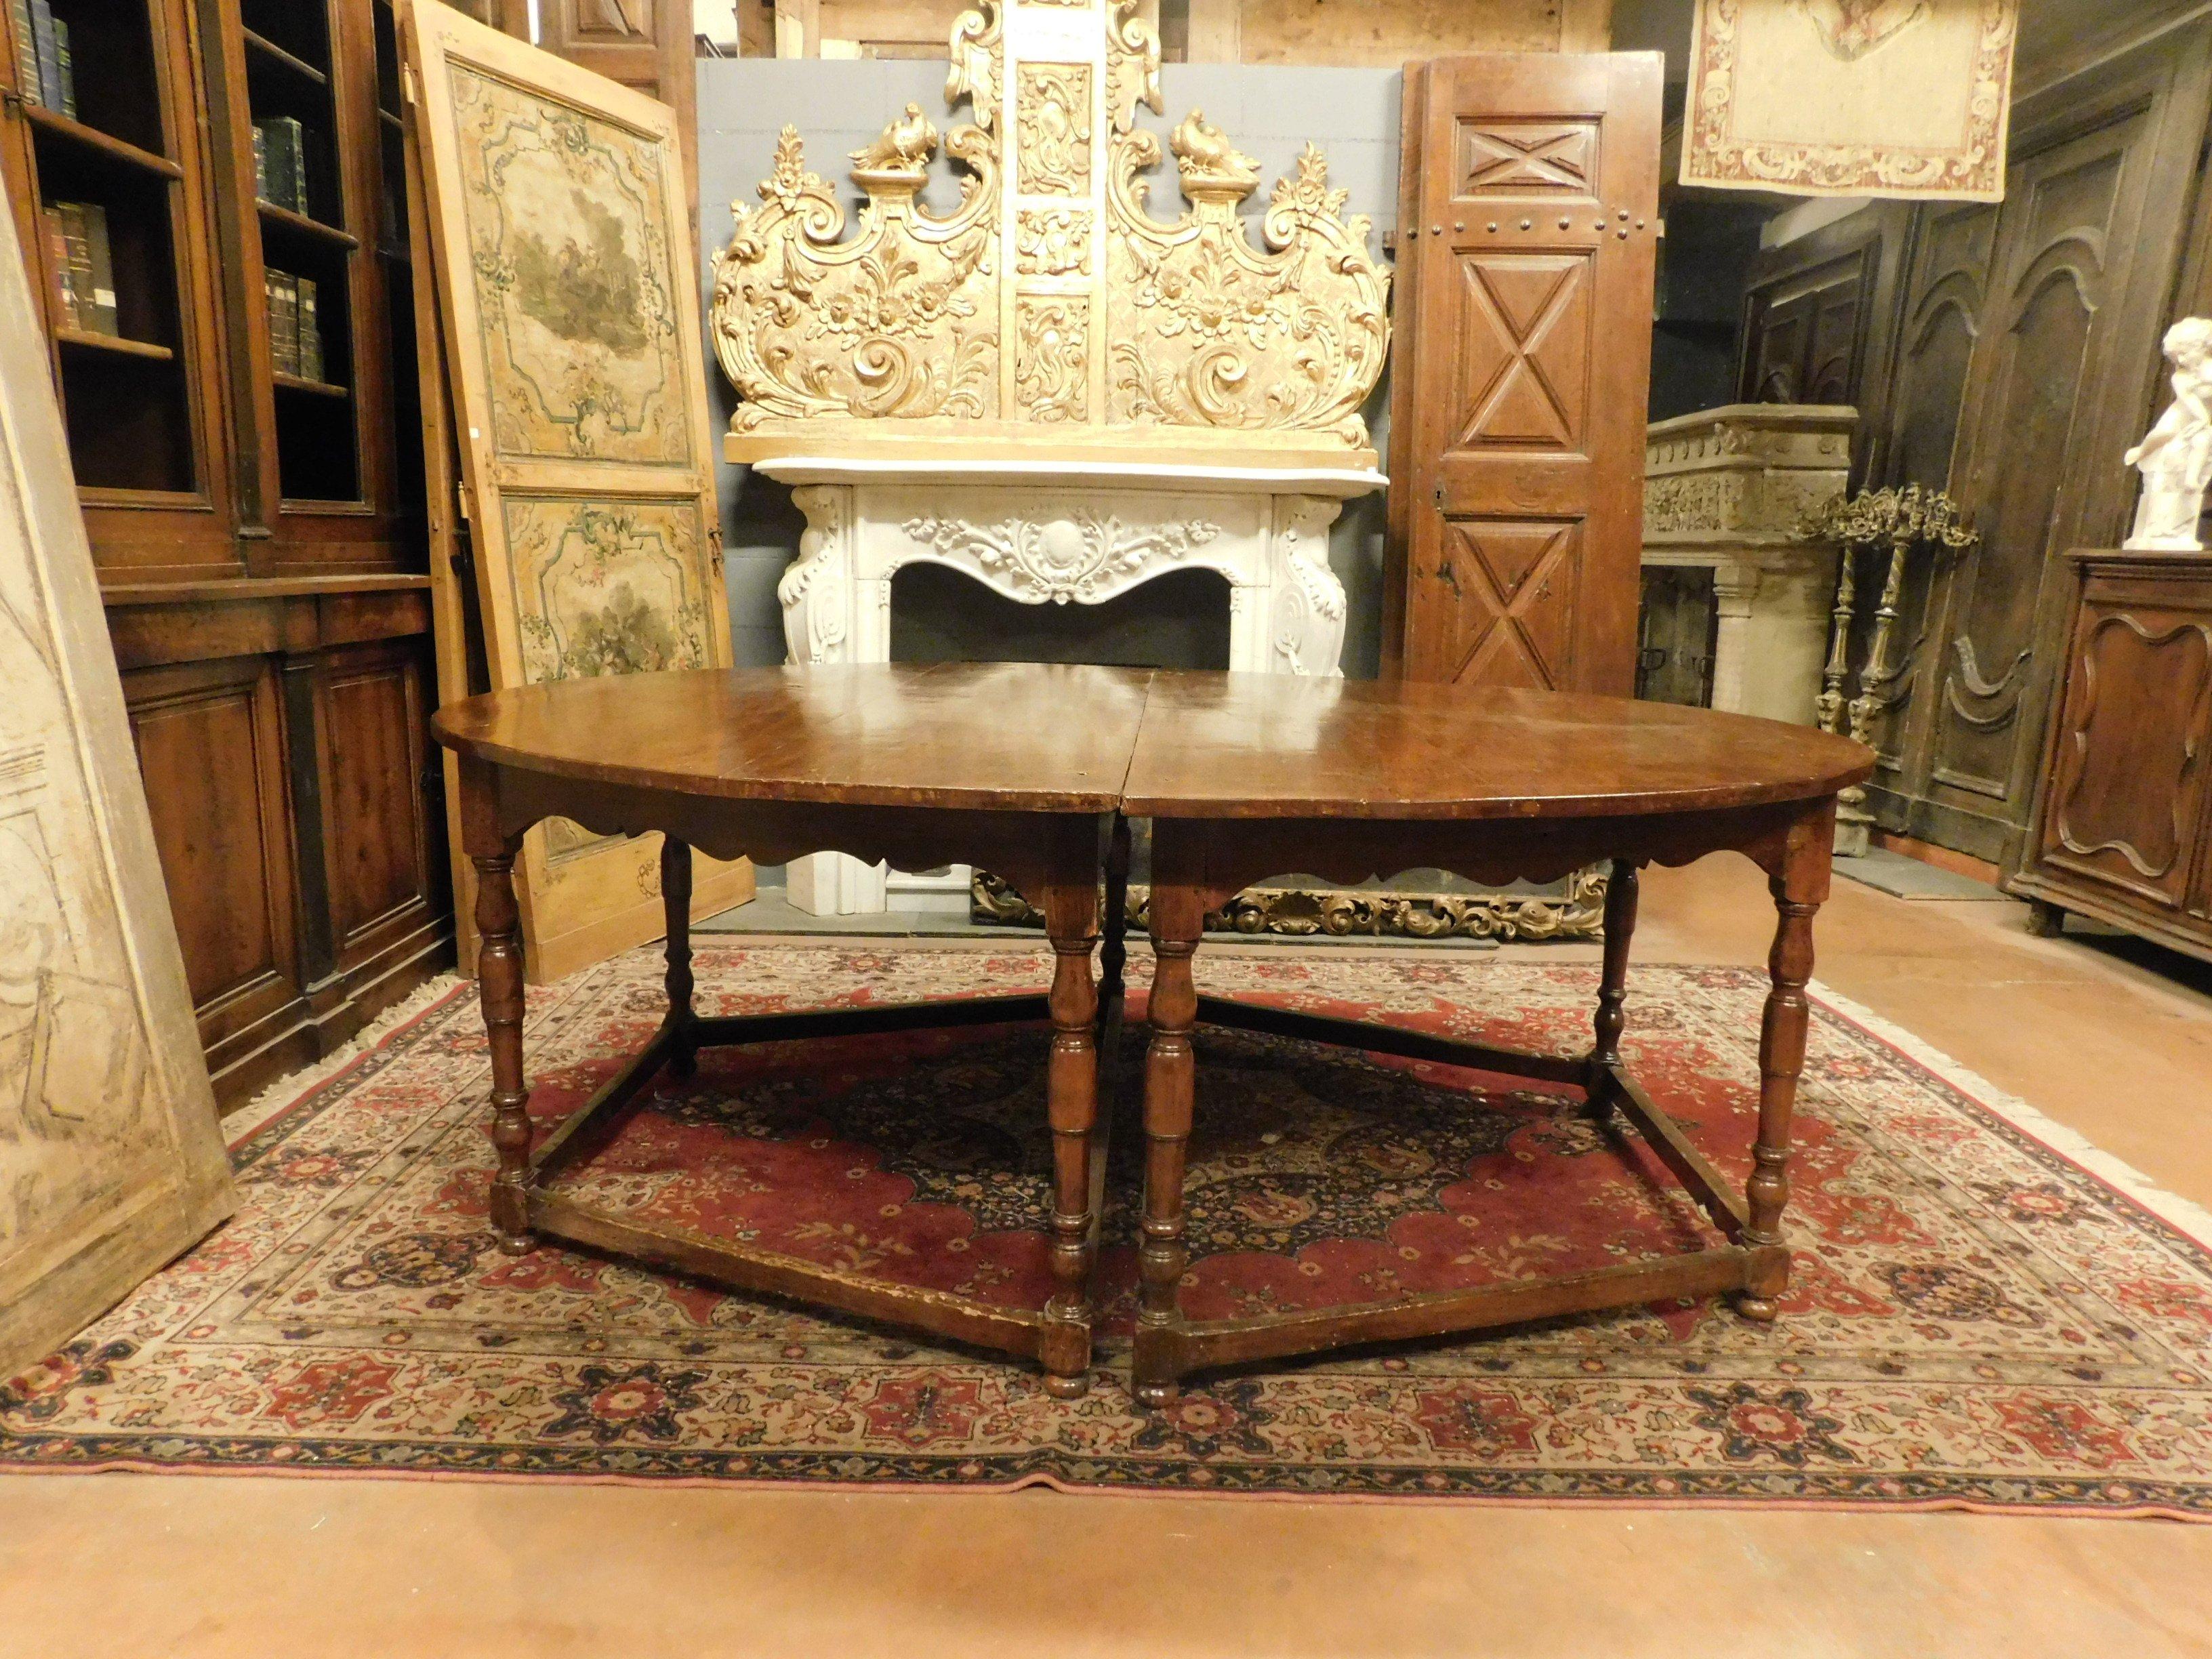 Antique Oval Table in Beechwood, Divisible 2 Half-Moons with 8 Legs, 1600, Italy For Sale 2